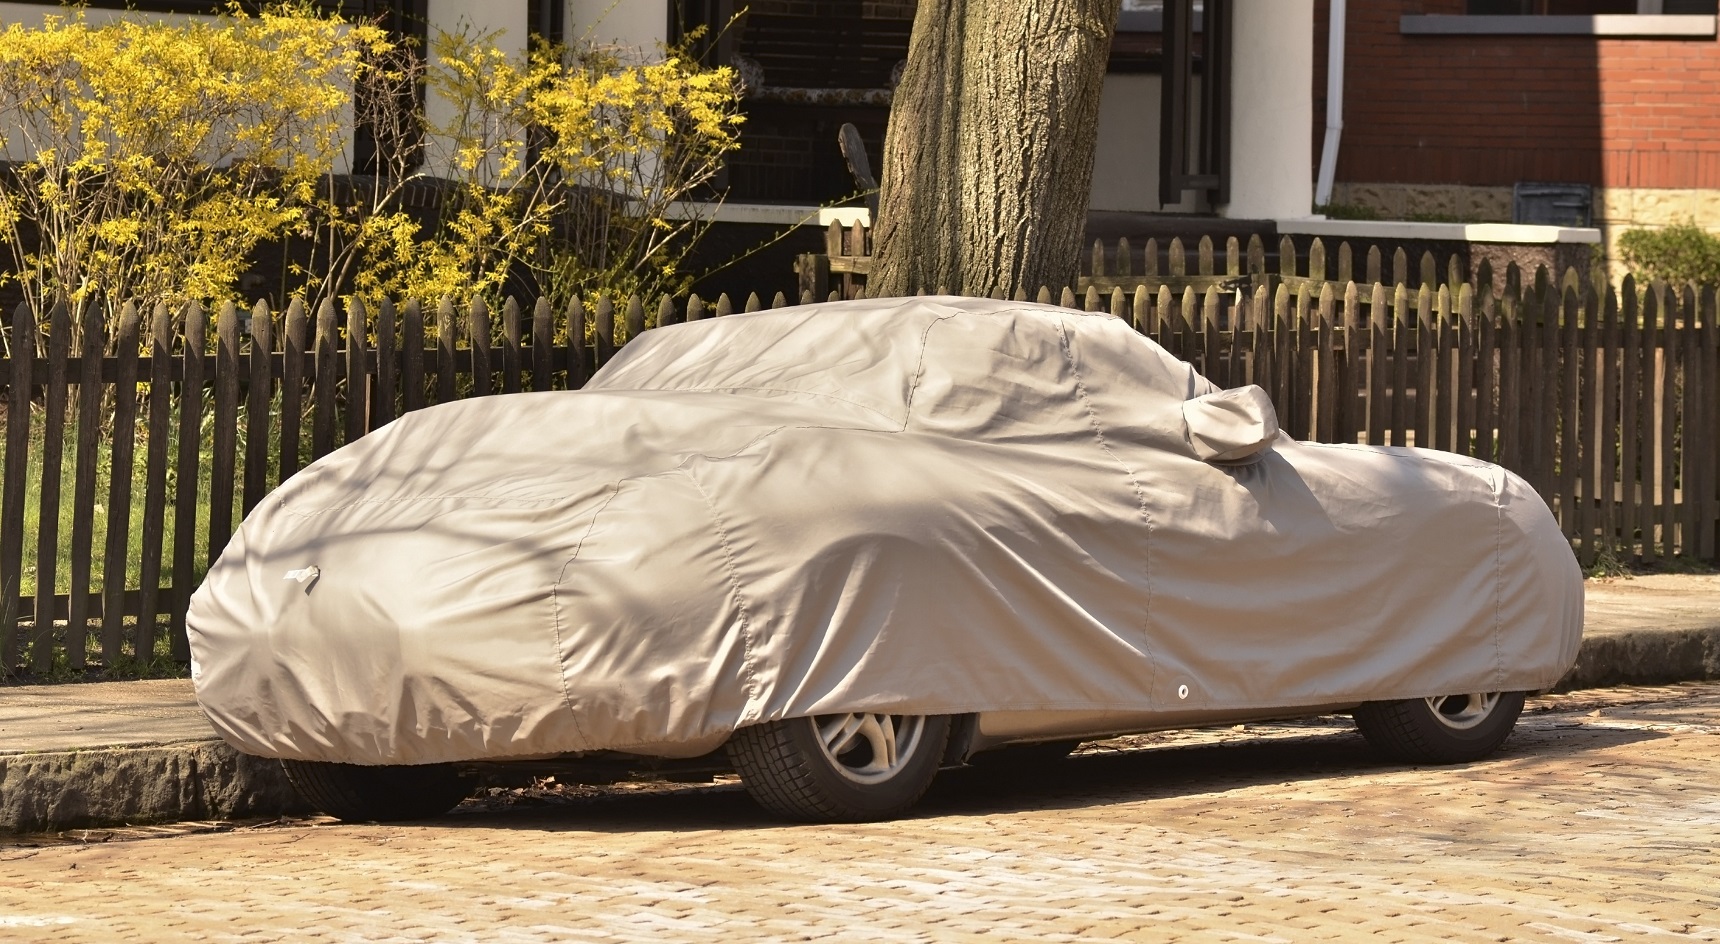 Hailproof car cover.